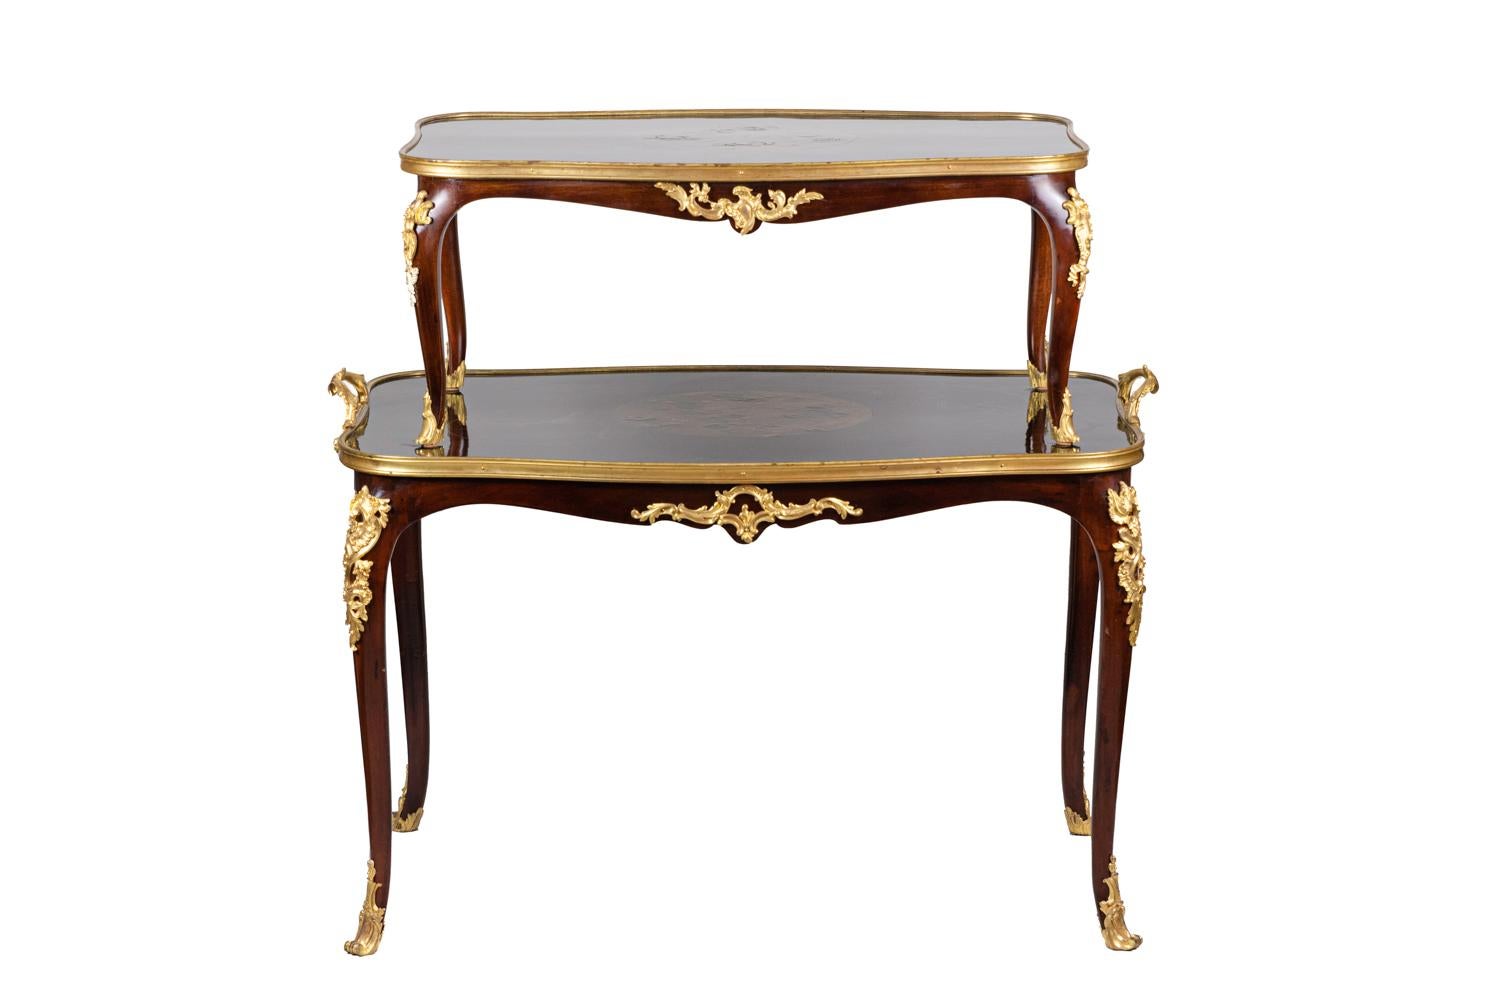 Louis XV style tea table in mahogany with two overlapped scalloped trays, each standing on four cabriole legs. Removable upper tray.
Lacquer decor with a black background and gilt Chinese motifs figuring three circles decorated with a cherry tree,